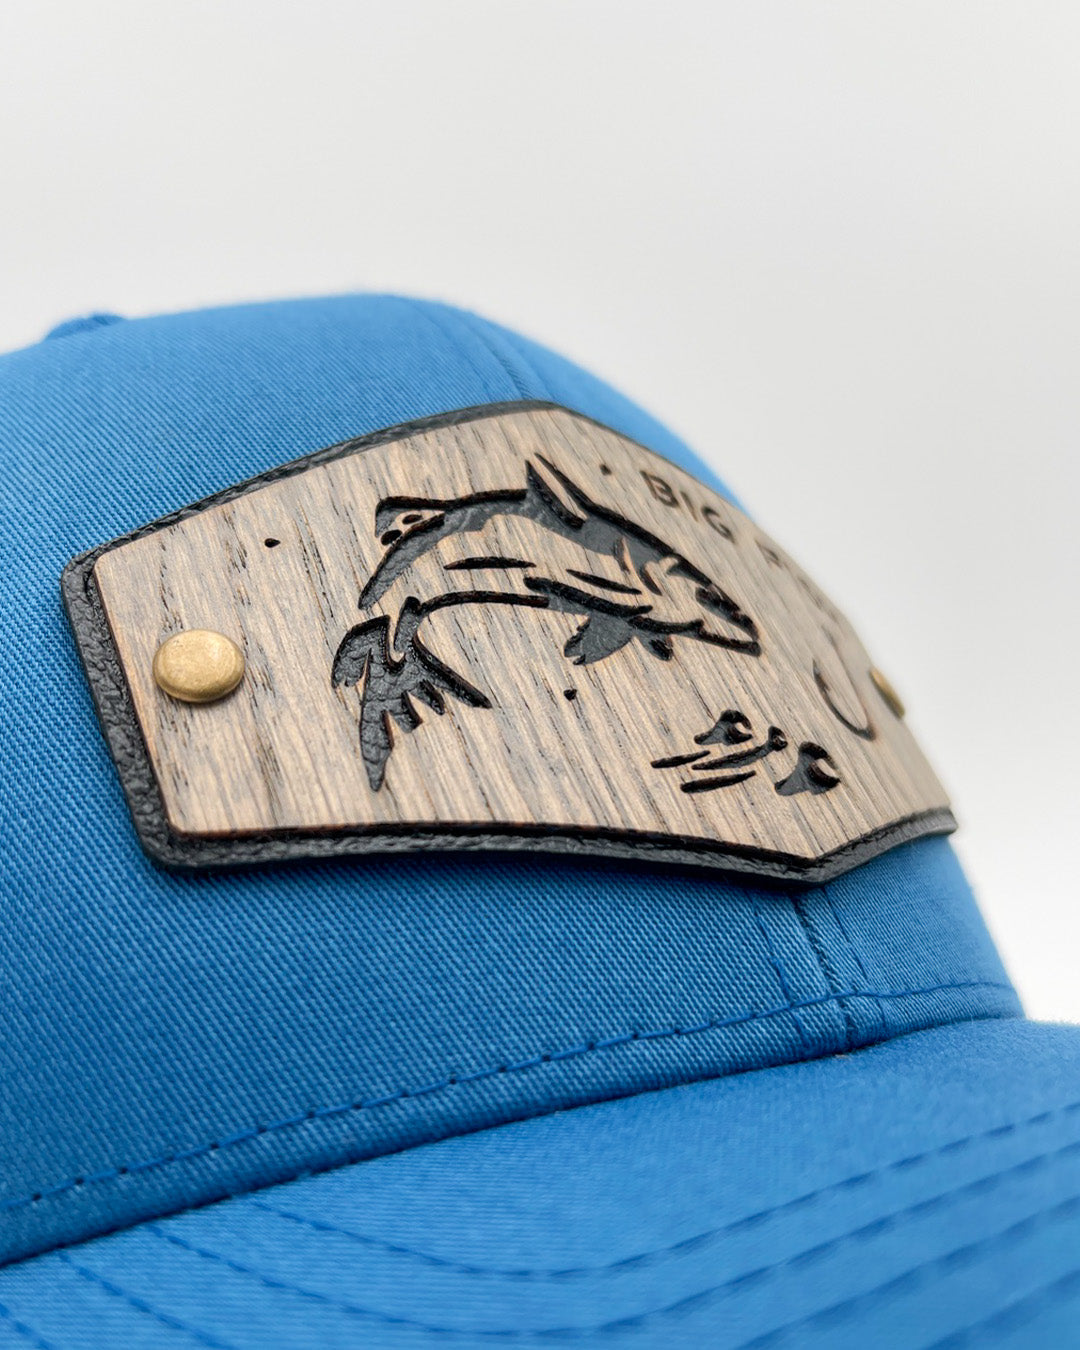 Affordable Custom Hats Leather Patches Hats Big Fish Real Wood Patch Hat Retro Trucker Mesh Cap 